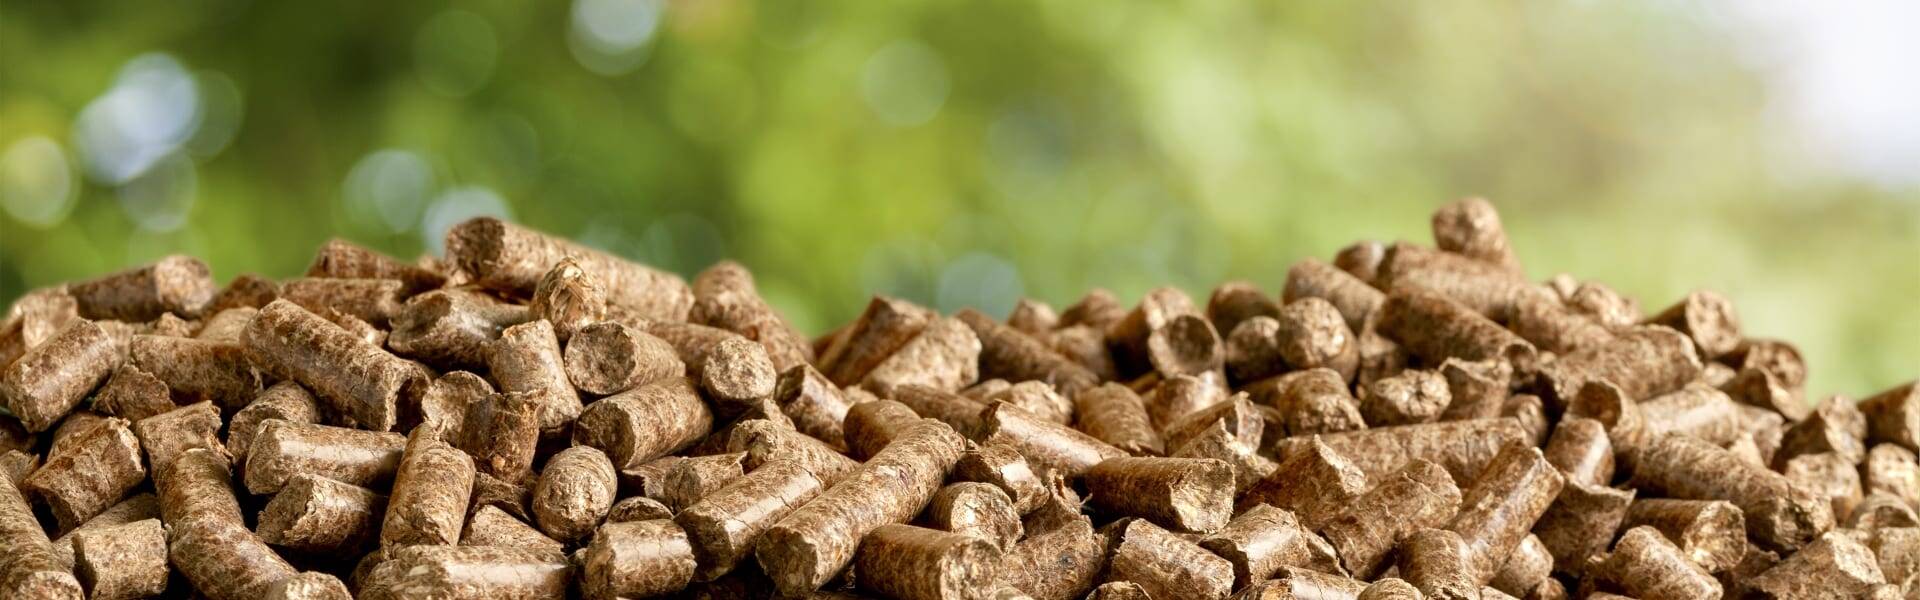 NAO raises doubts over sustainability of biomass plants